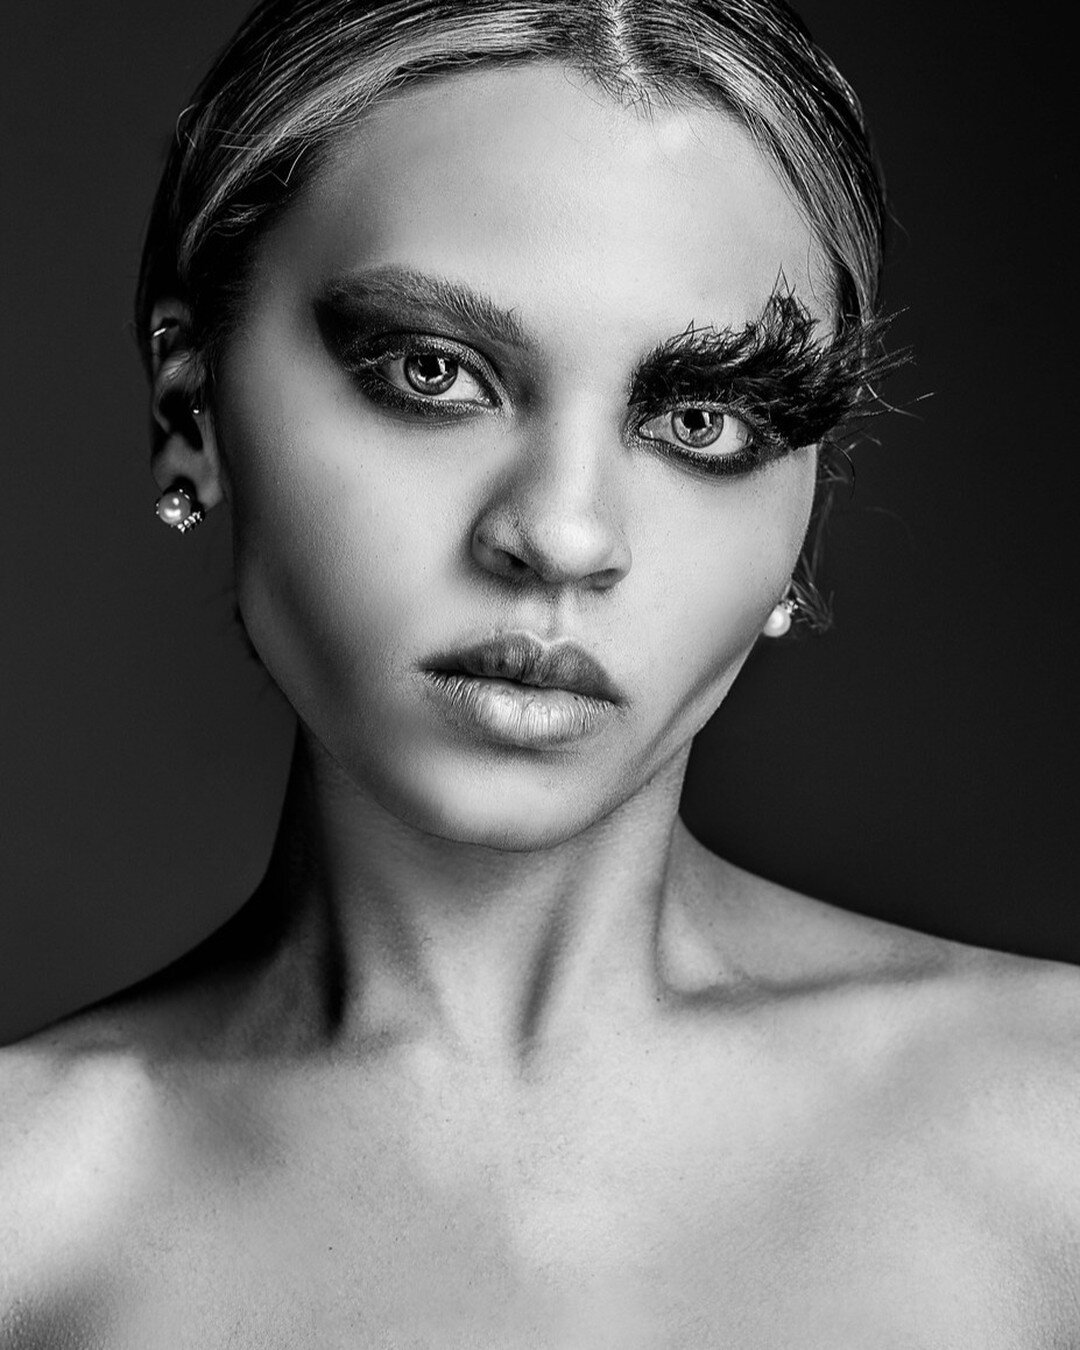 Happy Focused Magazine Friday!
#
As seen in last year's special birthday issue. Because sometimes simplicity says it best...
#
#dallasphotographer #dallasmodels #dfwmodels #dfwphotographer #blackandwhitephotography #headshot #eyes #fashion #fashionph